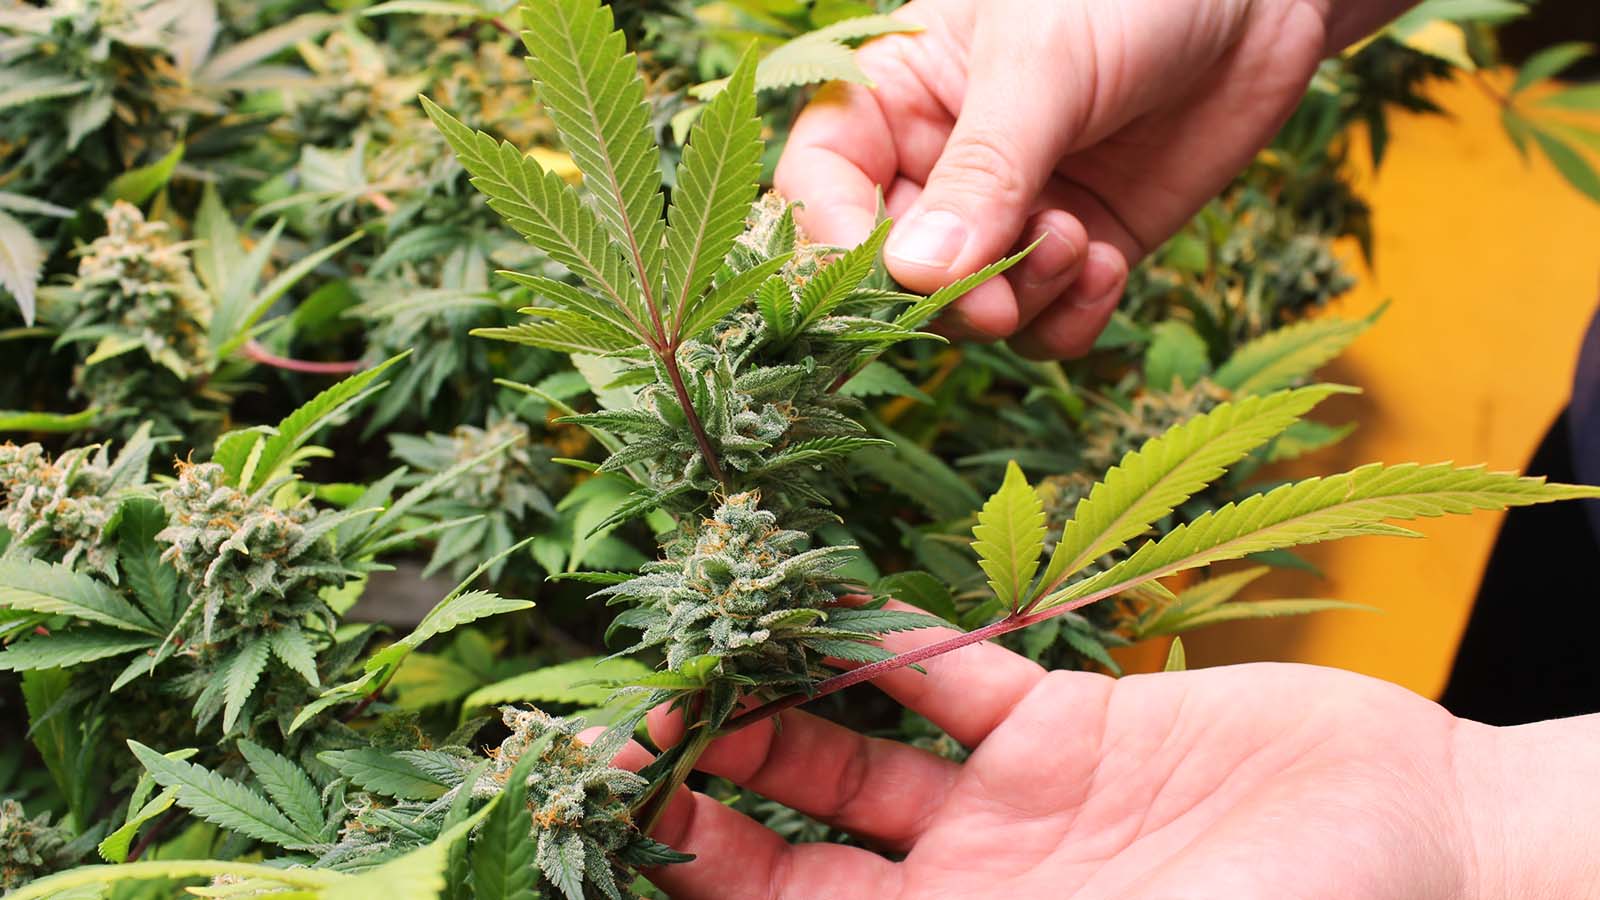 Two hands lift the bud of a cannabis plant.